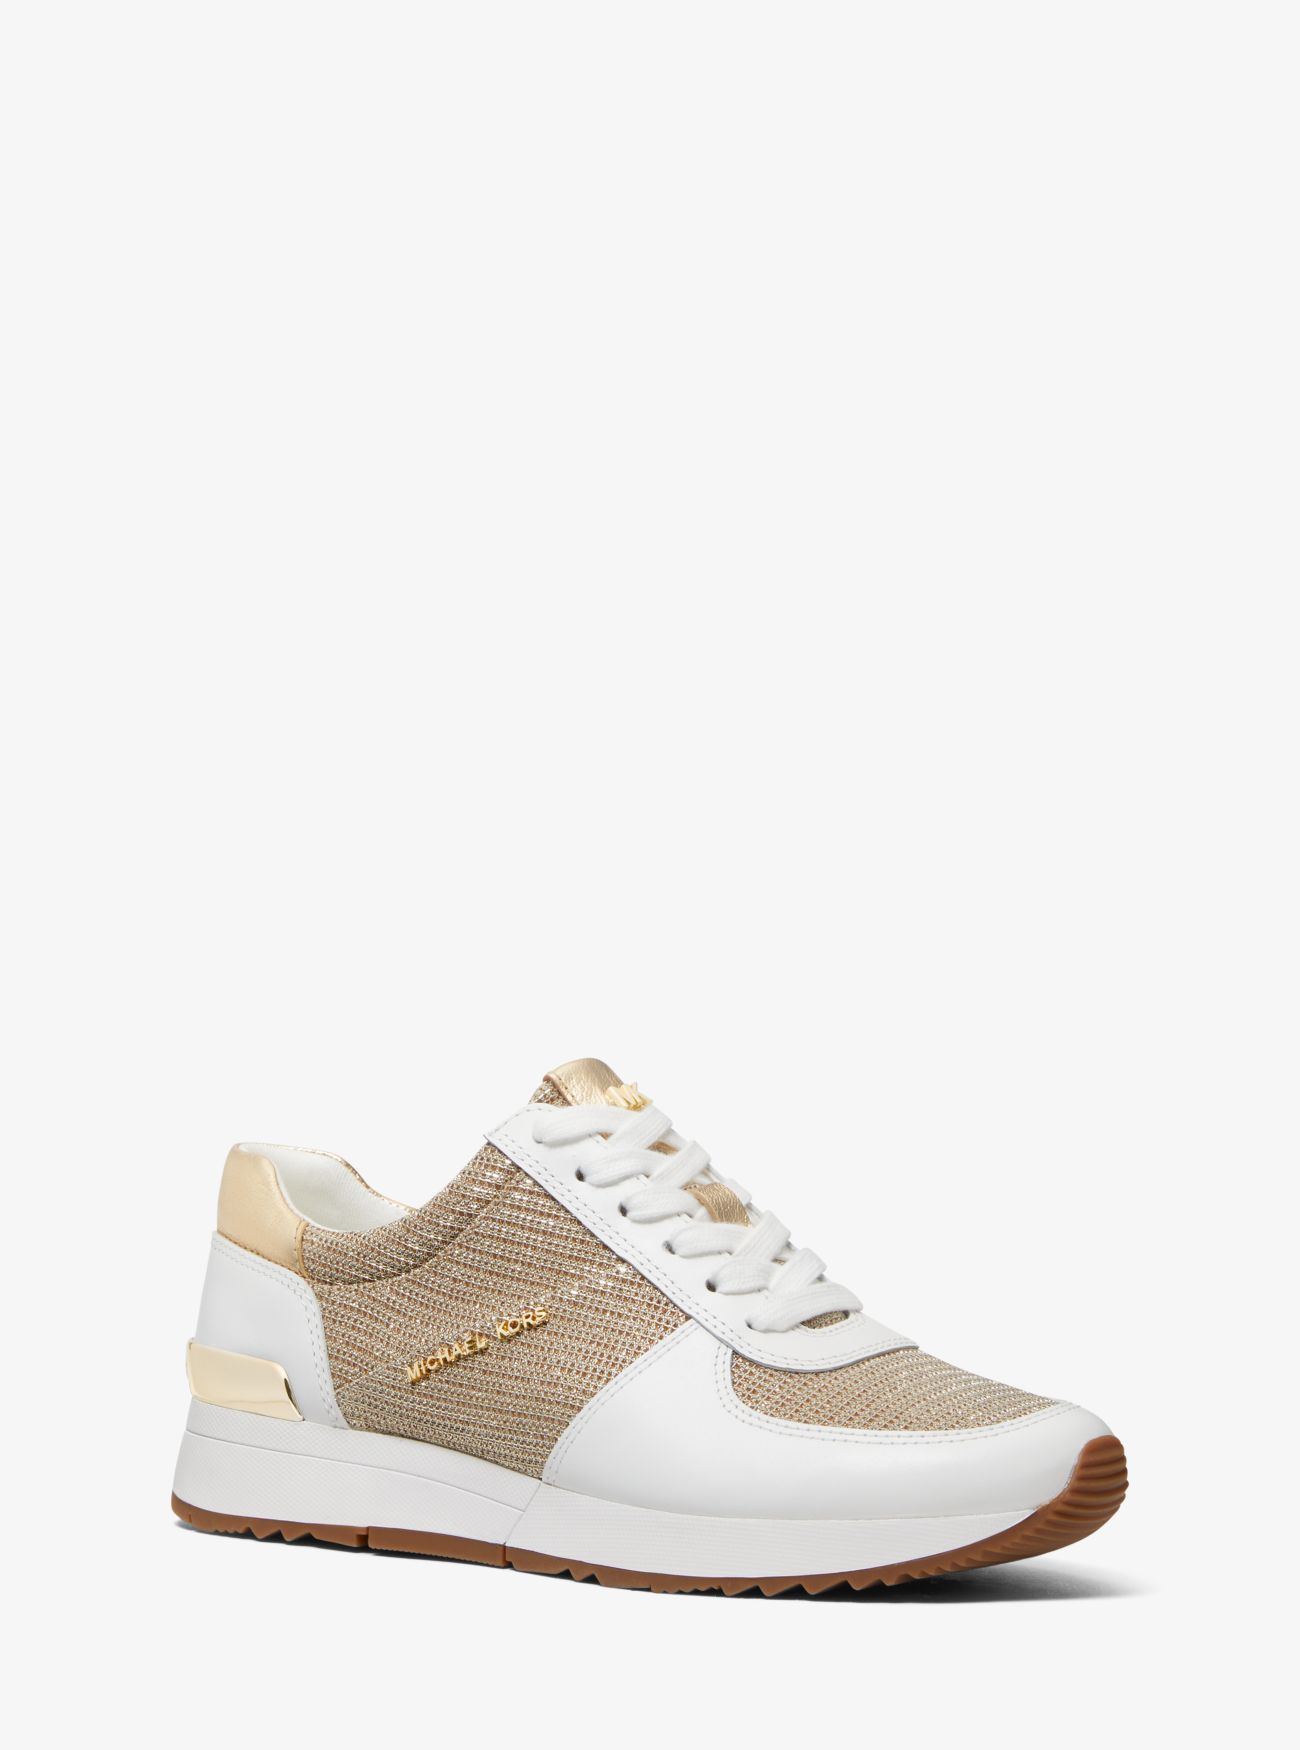 MK Allie Leather and Glitter Chain-Mesh Trainer - Pale Gold - Michael Kors